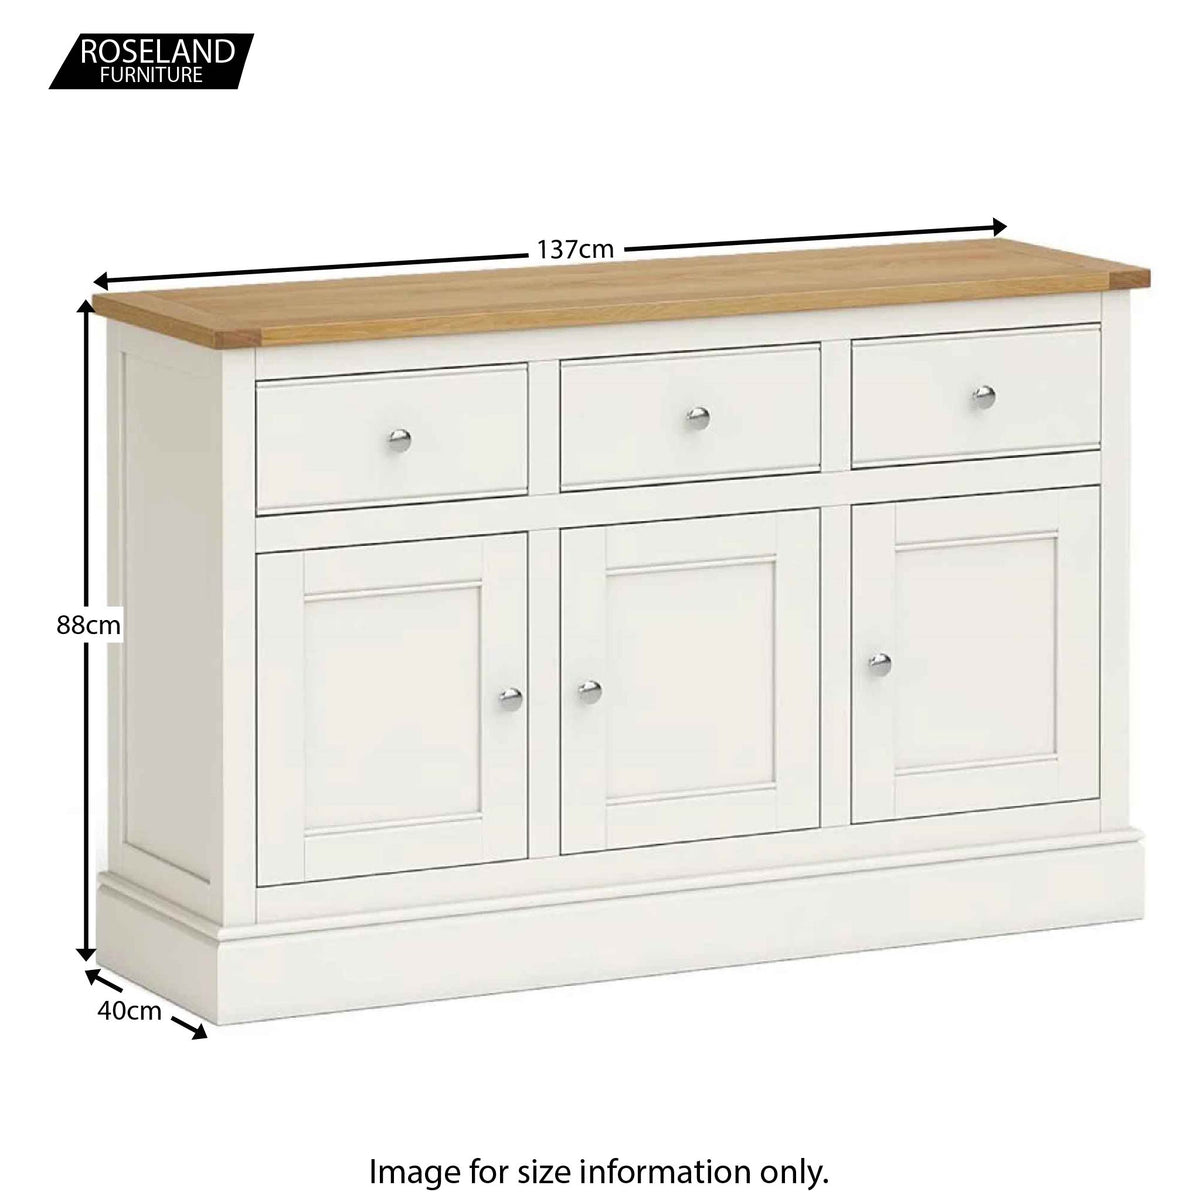 Chichester Large Sideboard in Ivory - Size Guide